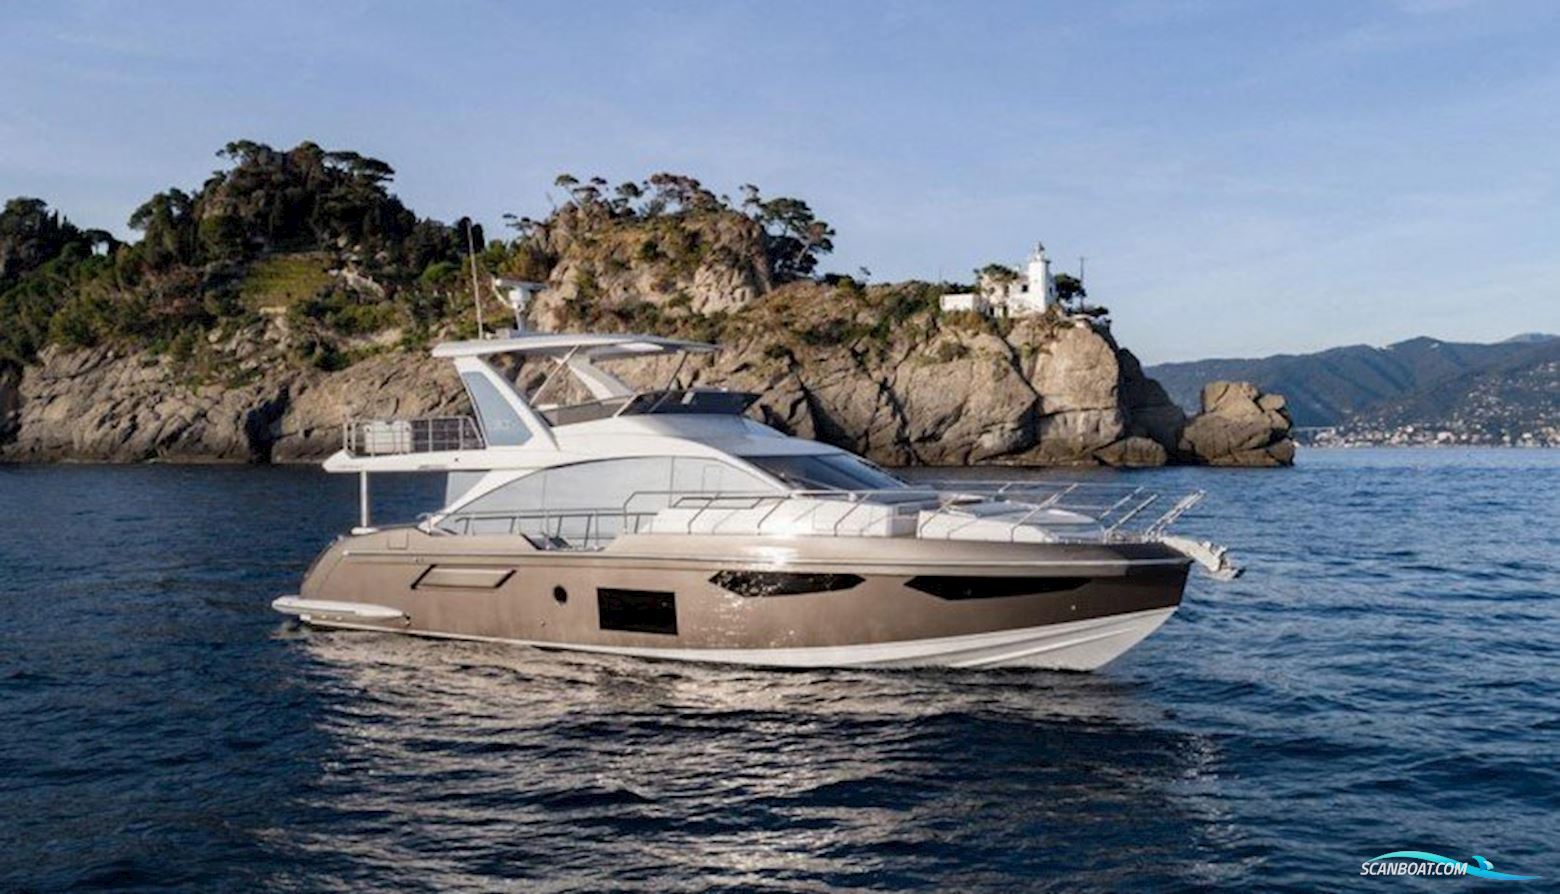 Azimut 60 Fly - 2019 Motor boat 2019, with Volvo Penta D13-900 engine, Austria